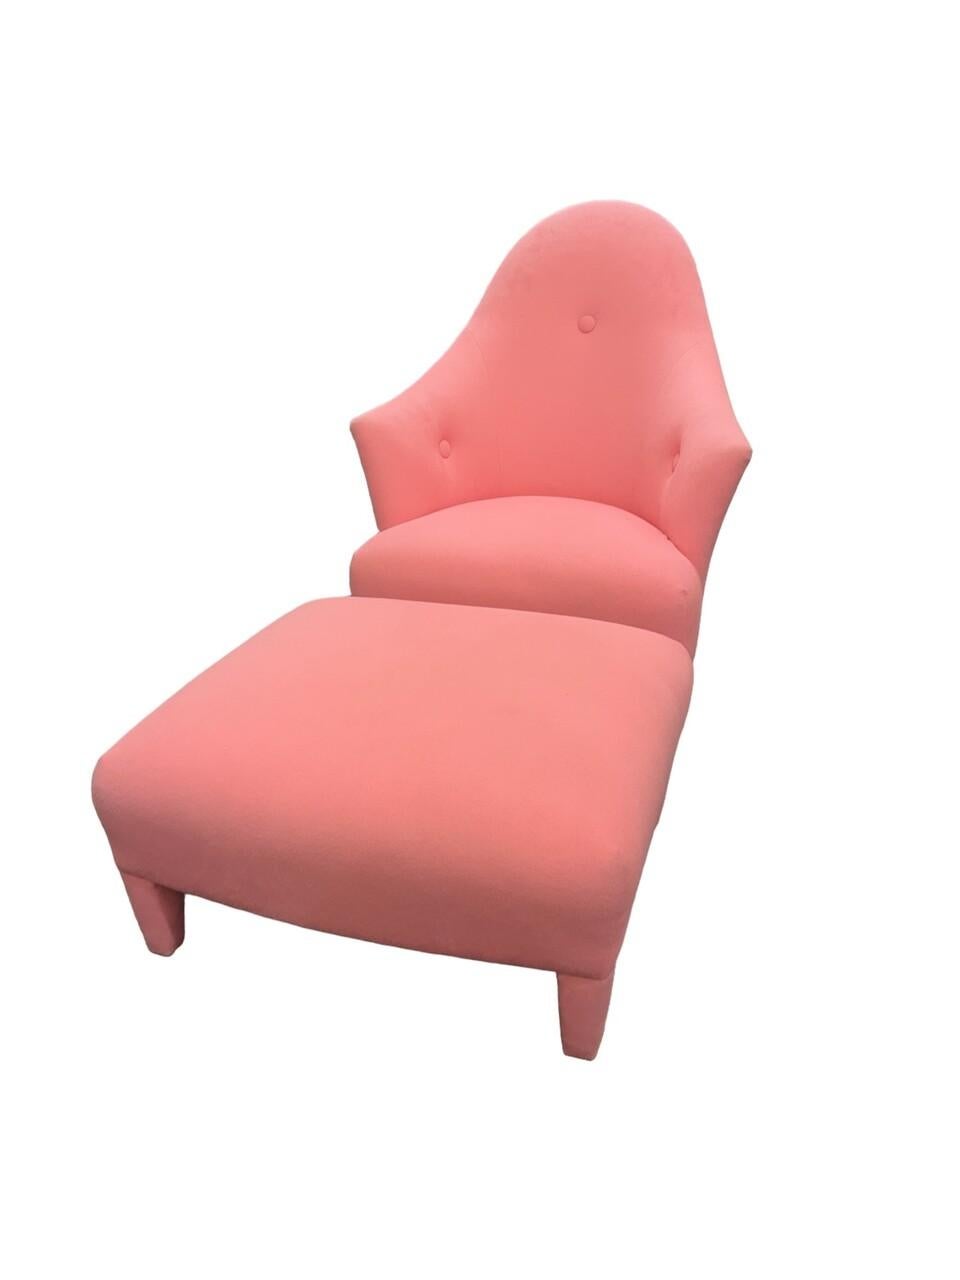 The John Hutton for Donghia Ghost Chair and Ottoman in pink exude timeless elegance and modern sophistication. Crafted with meticulous attention to detail, the transparent acrylic material creates a striking visual effect, while the plush pink